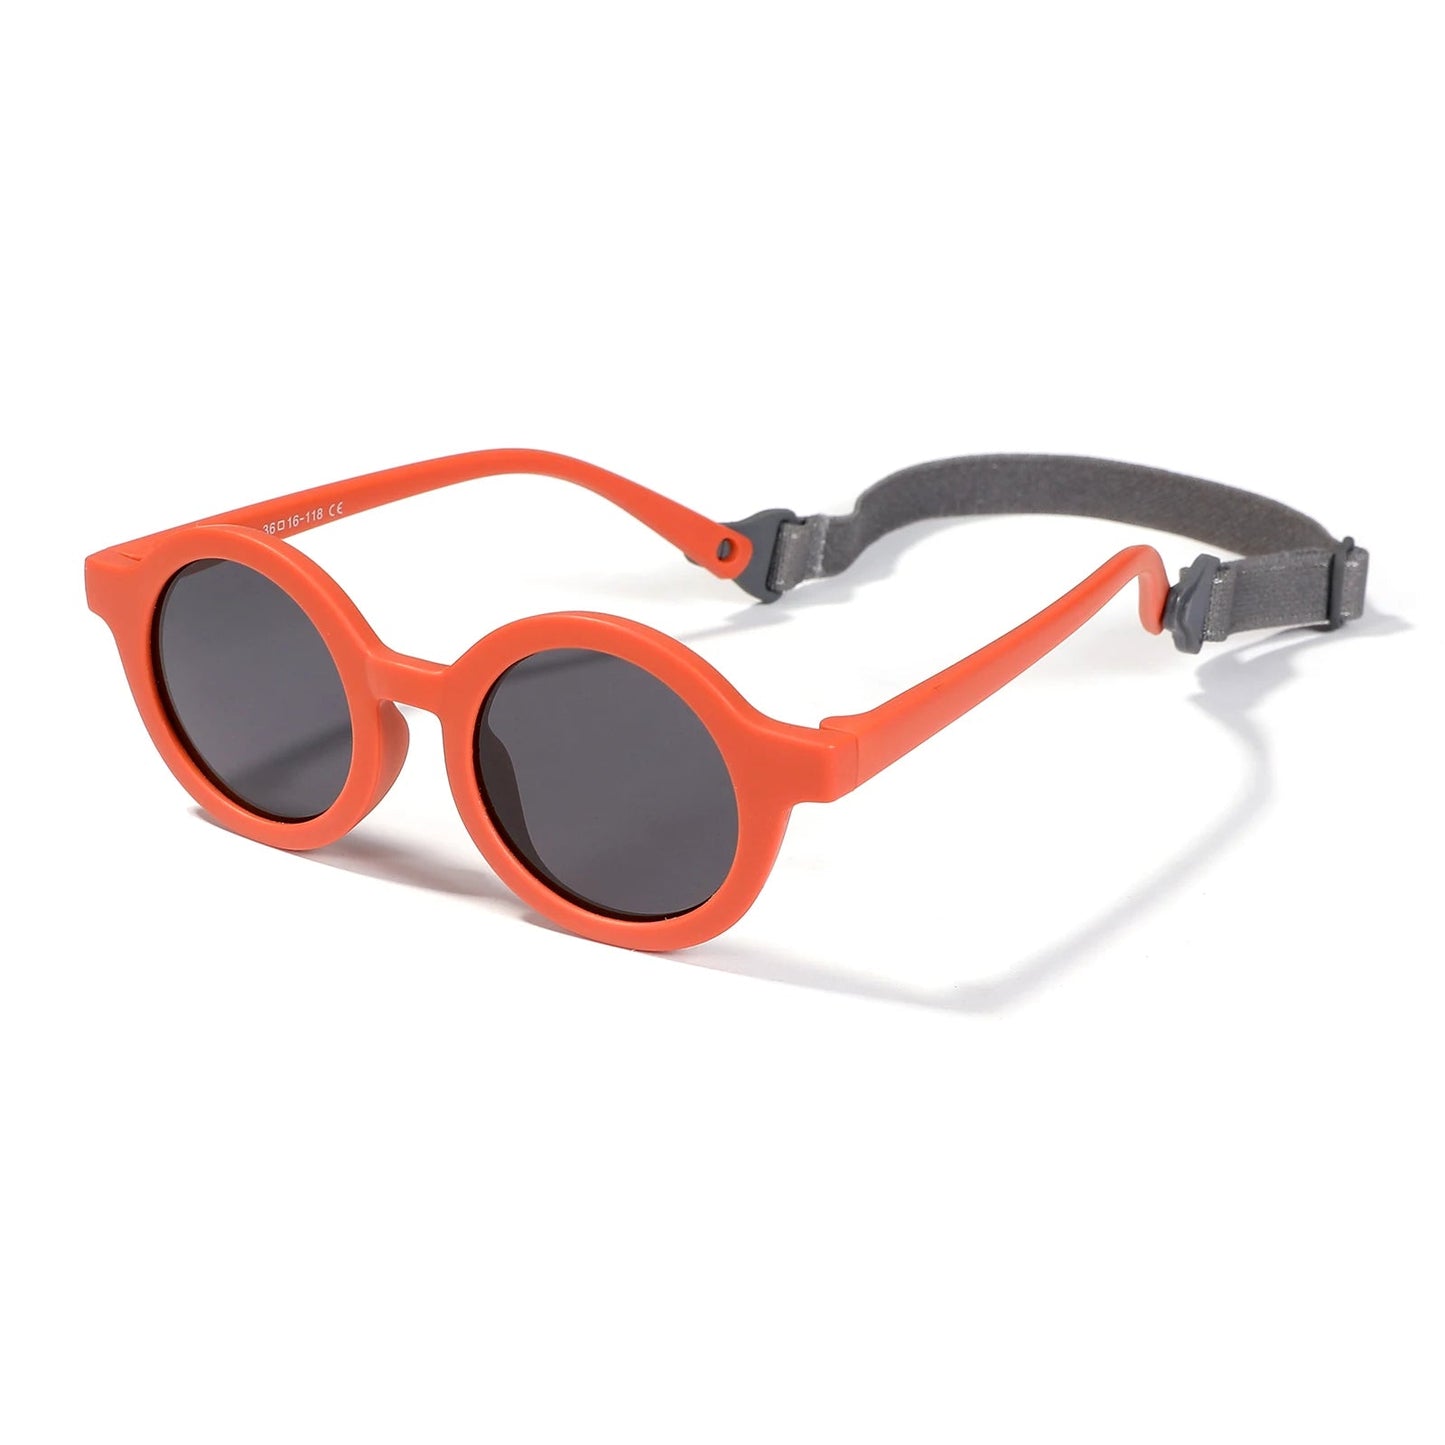 Polarized Baby Shades: Safe Sun Style for Newborns! - The Little Big Store